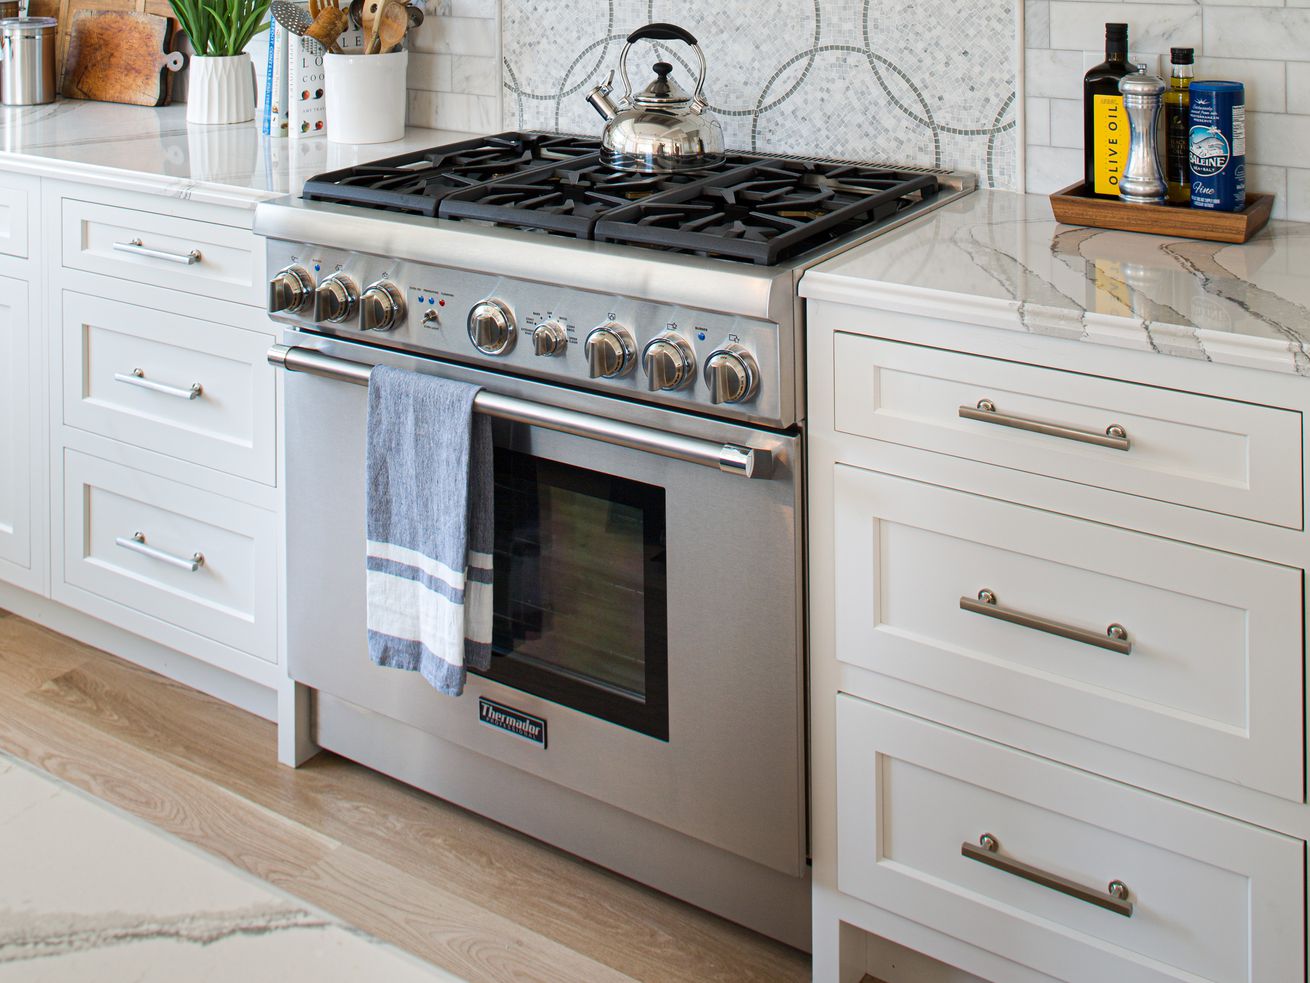 A gas oven in a modern kitchen. 